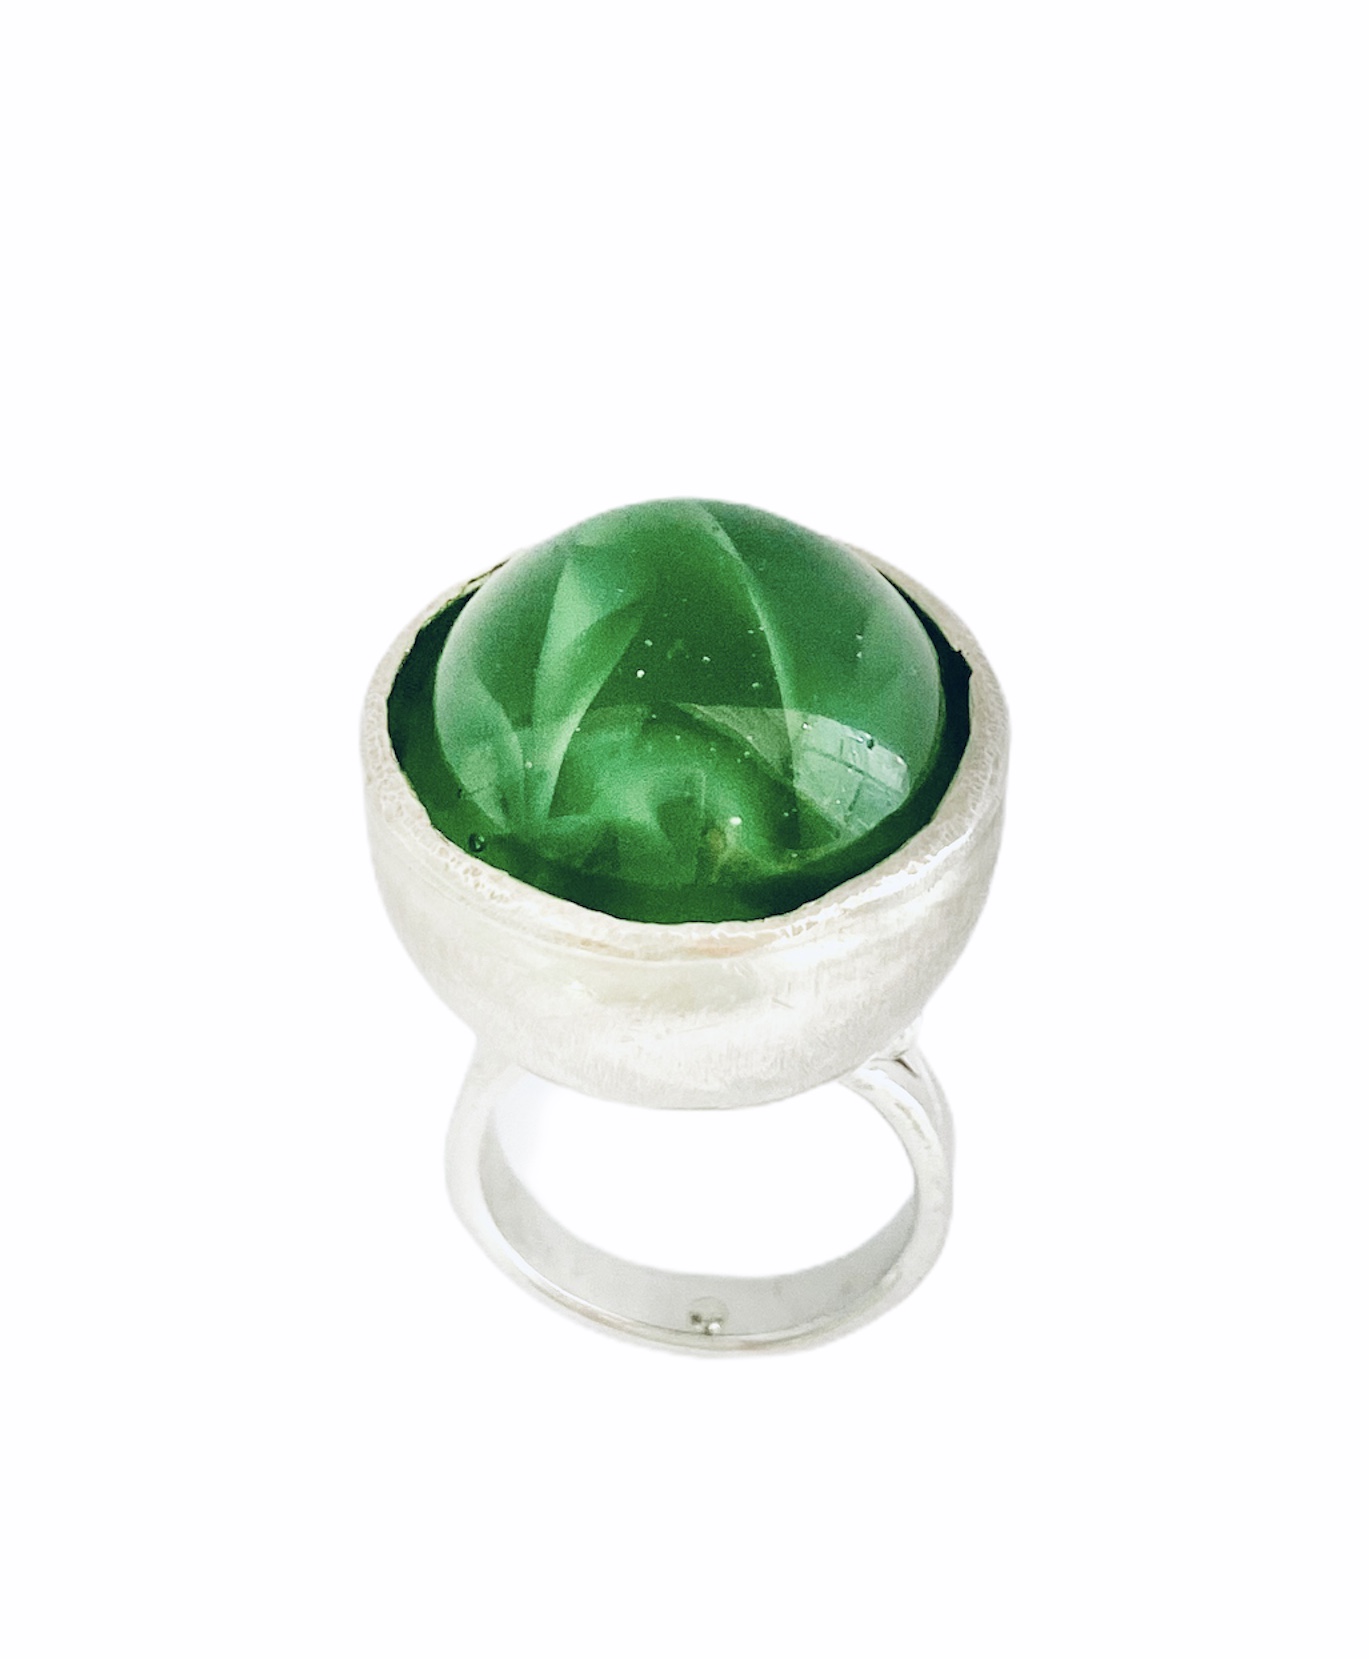 Teal sea Marble Sea Glass Ring – this tiny ocean